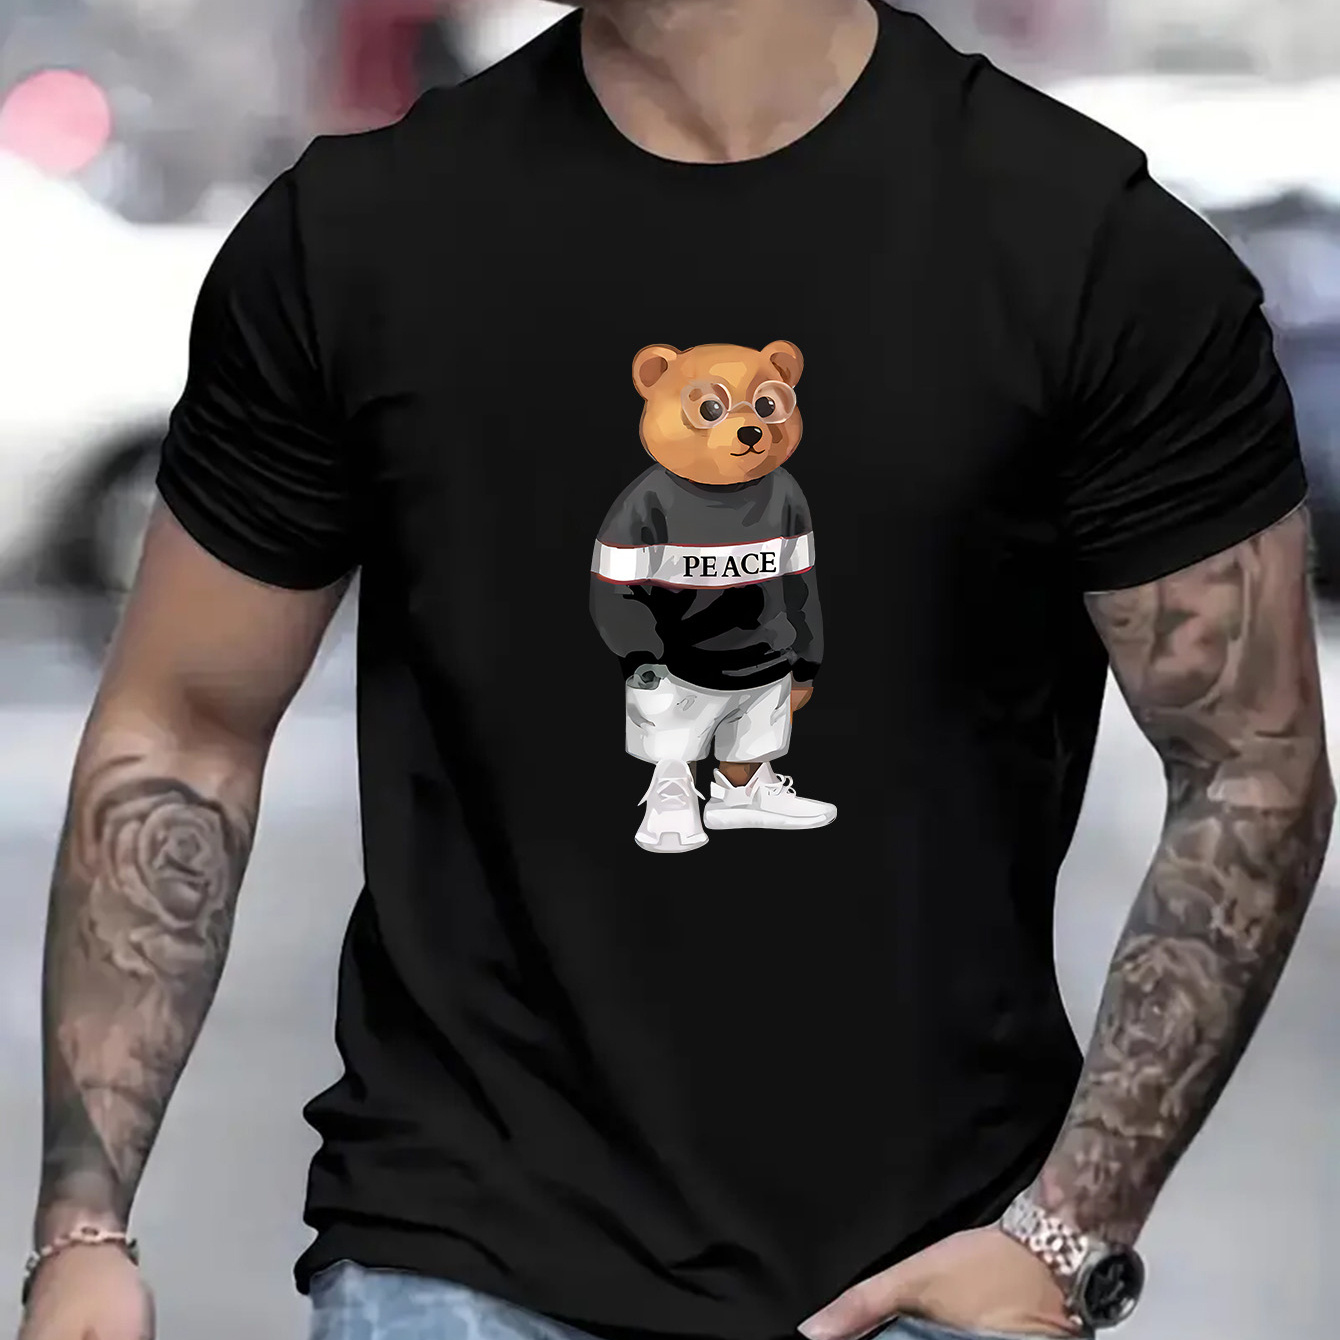 

Super Cool Bear Wearing Clothing Pattern, Men's Round Neck Short Sleeve Fashion Regular Fit T-shirt For Spring Summer Holiday